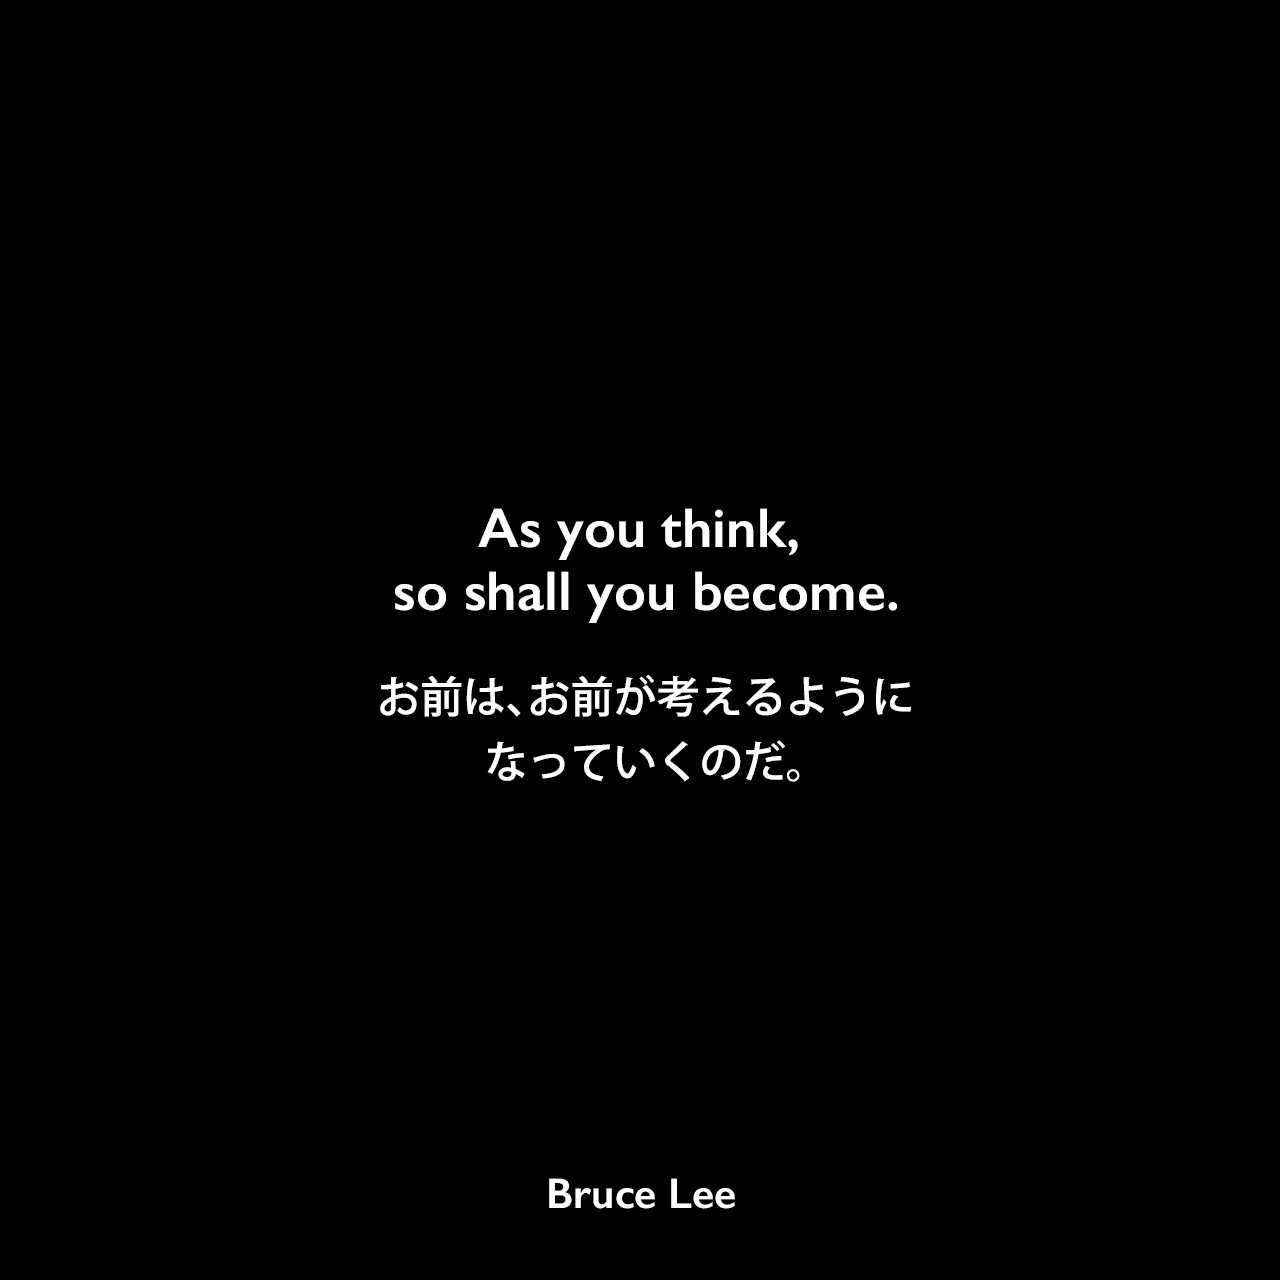 As you think, so shall you become.お前は、お前が考えるようになっていくのだ。